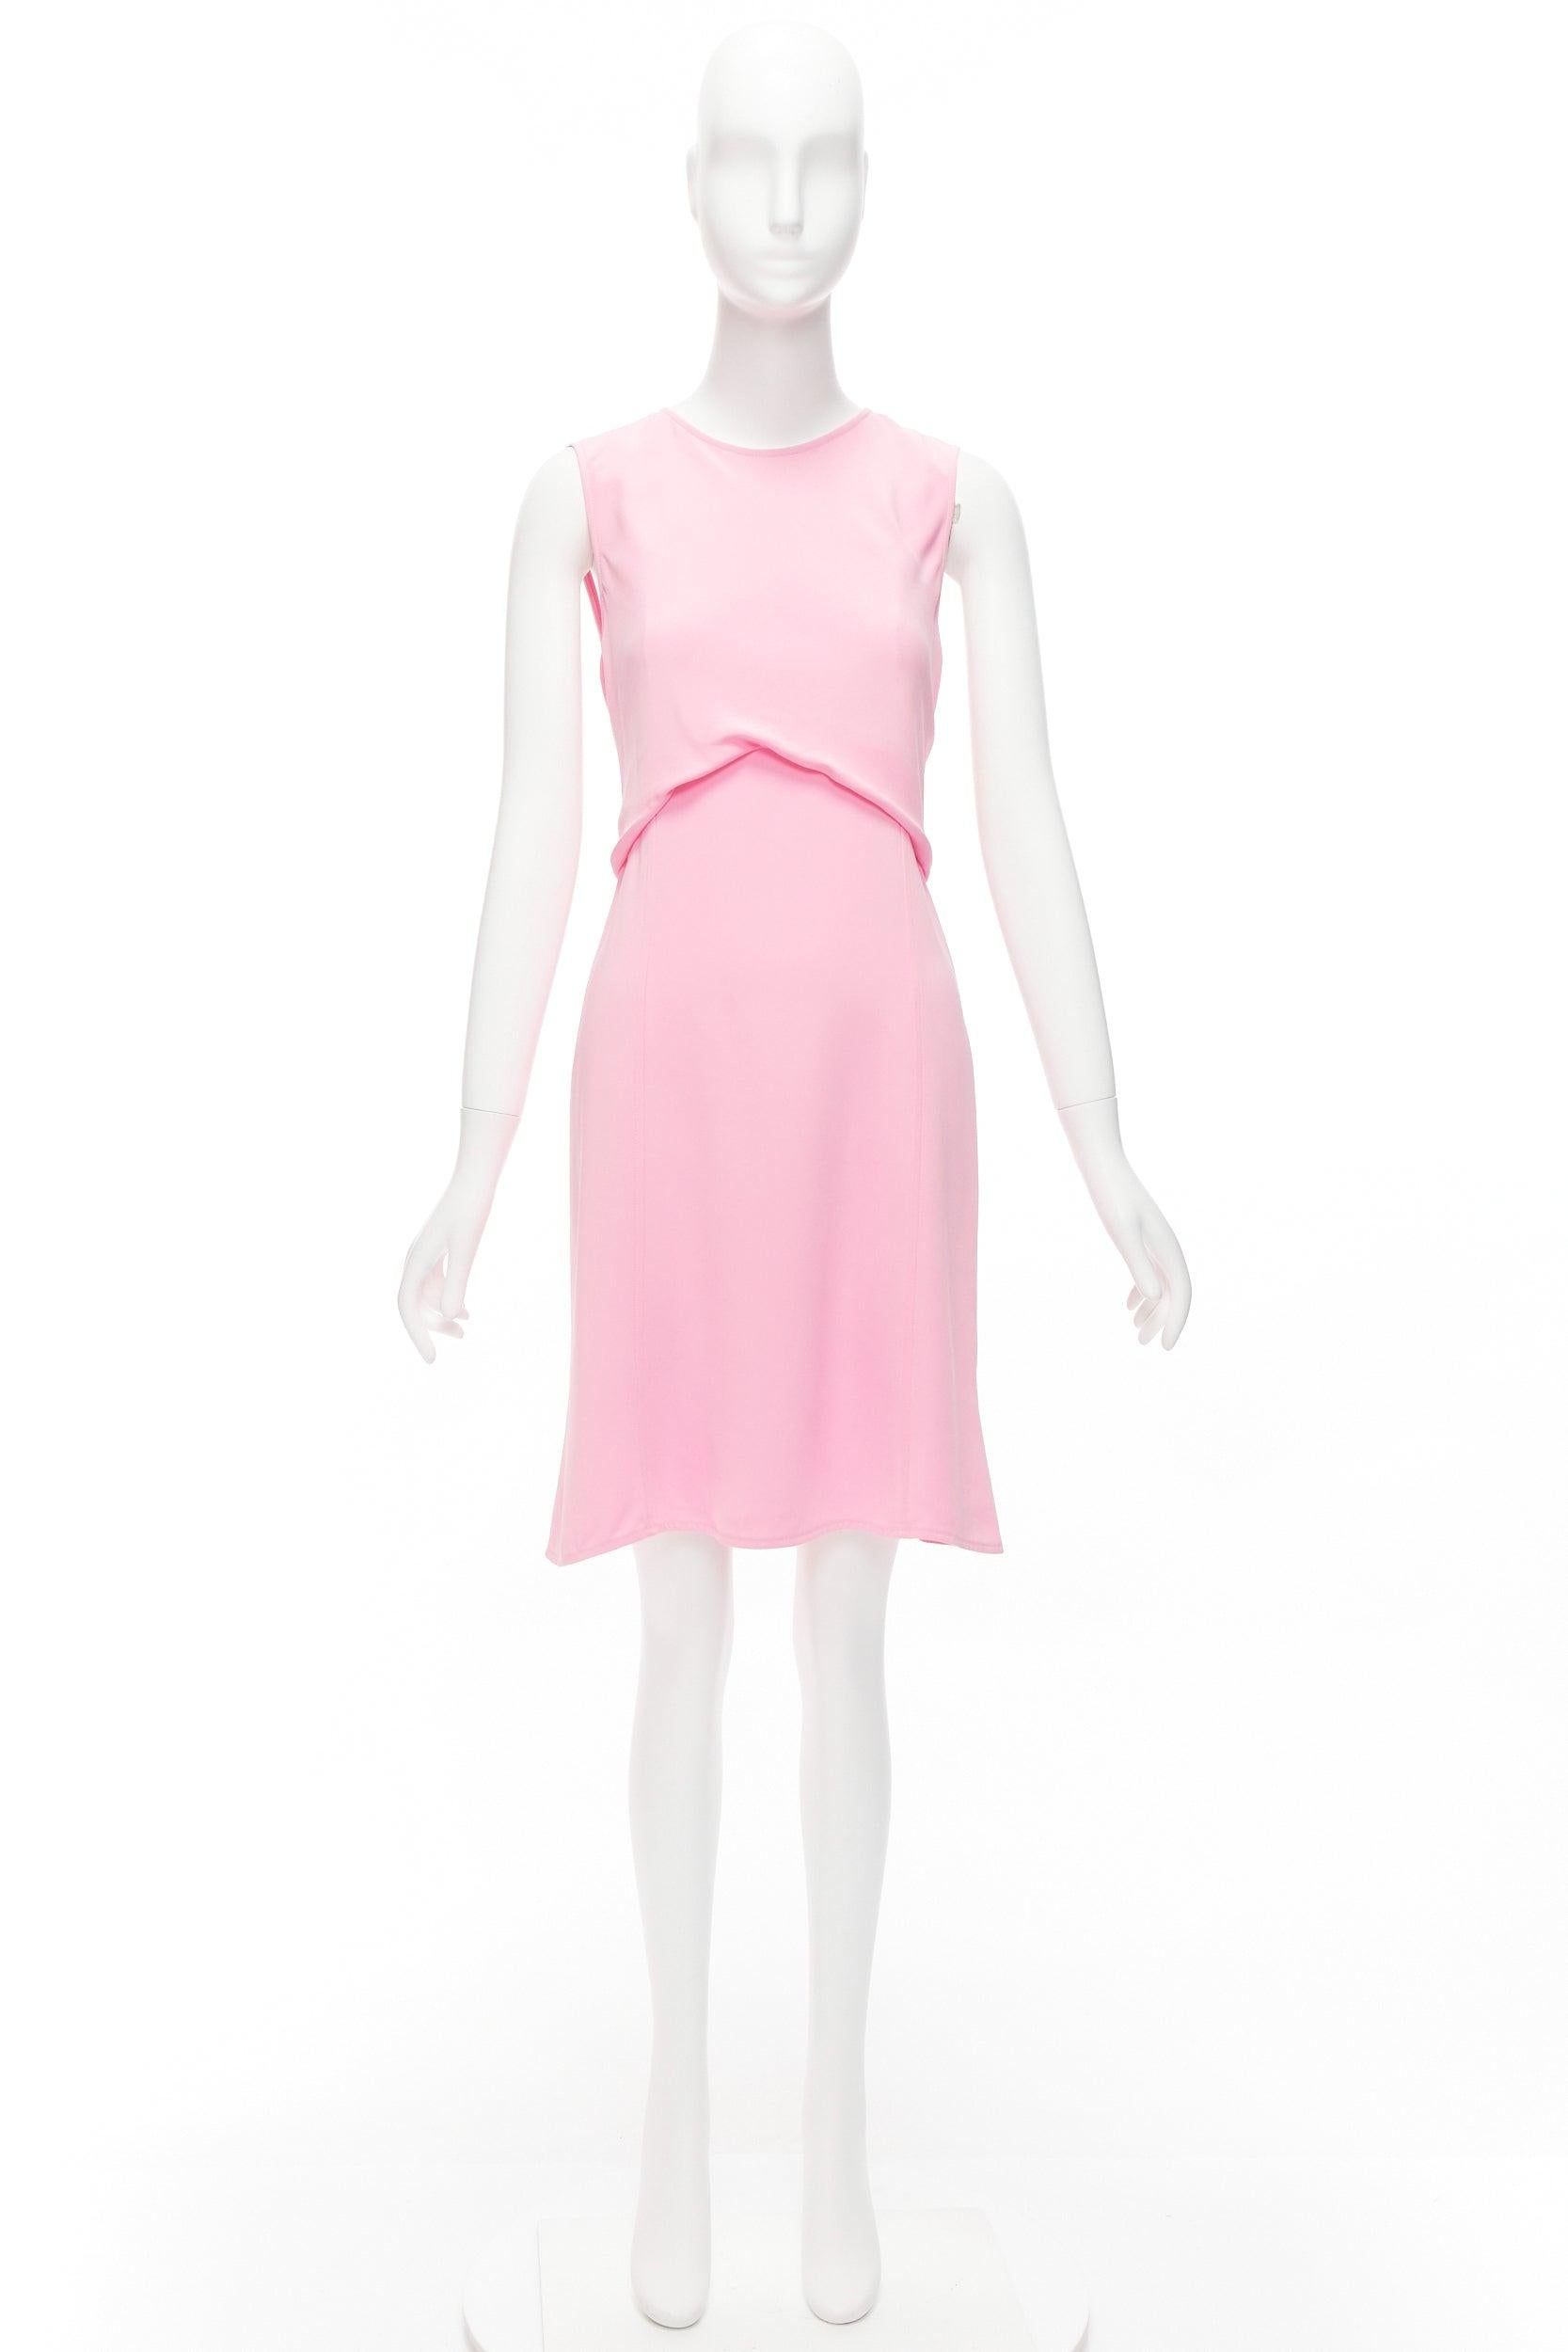 VICTORIA BECKHAM pink silky drape front ruched back sleeveless shift dress For Sale 5